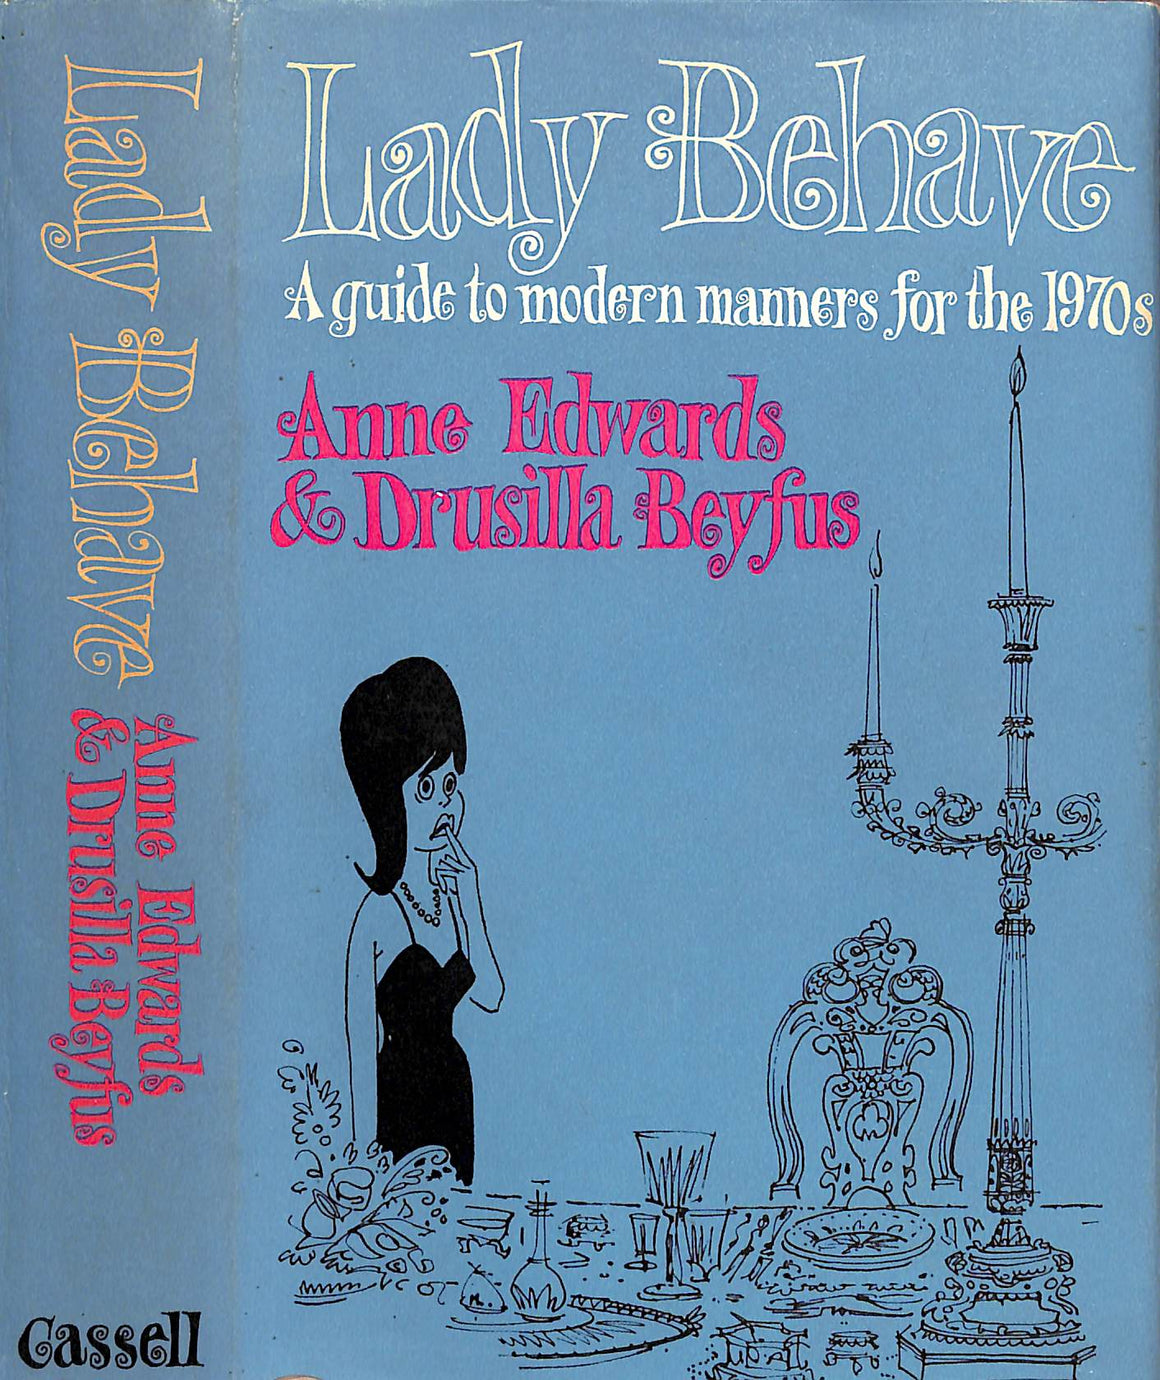 "Lady Behave: A Guide To Modern Manners For The 1970s" 1969 EDWARDS, Anne & BEYFUS, Drusilla